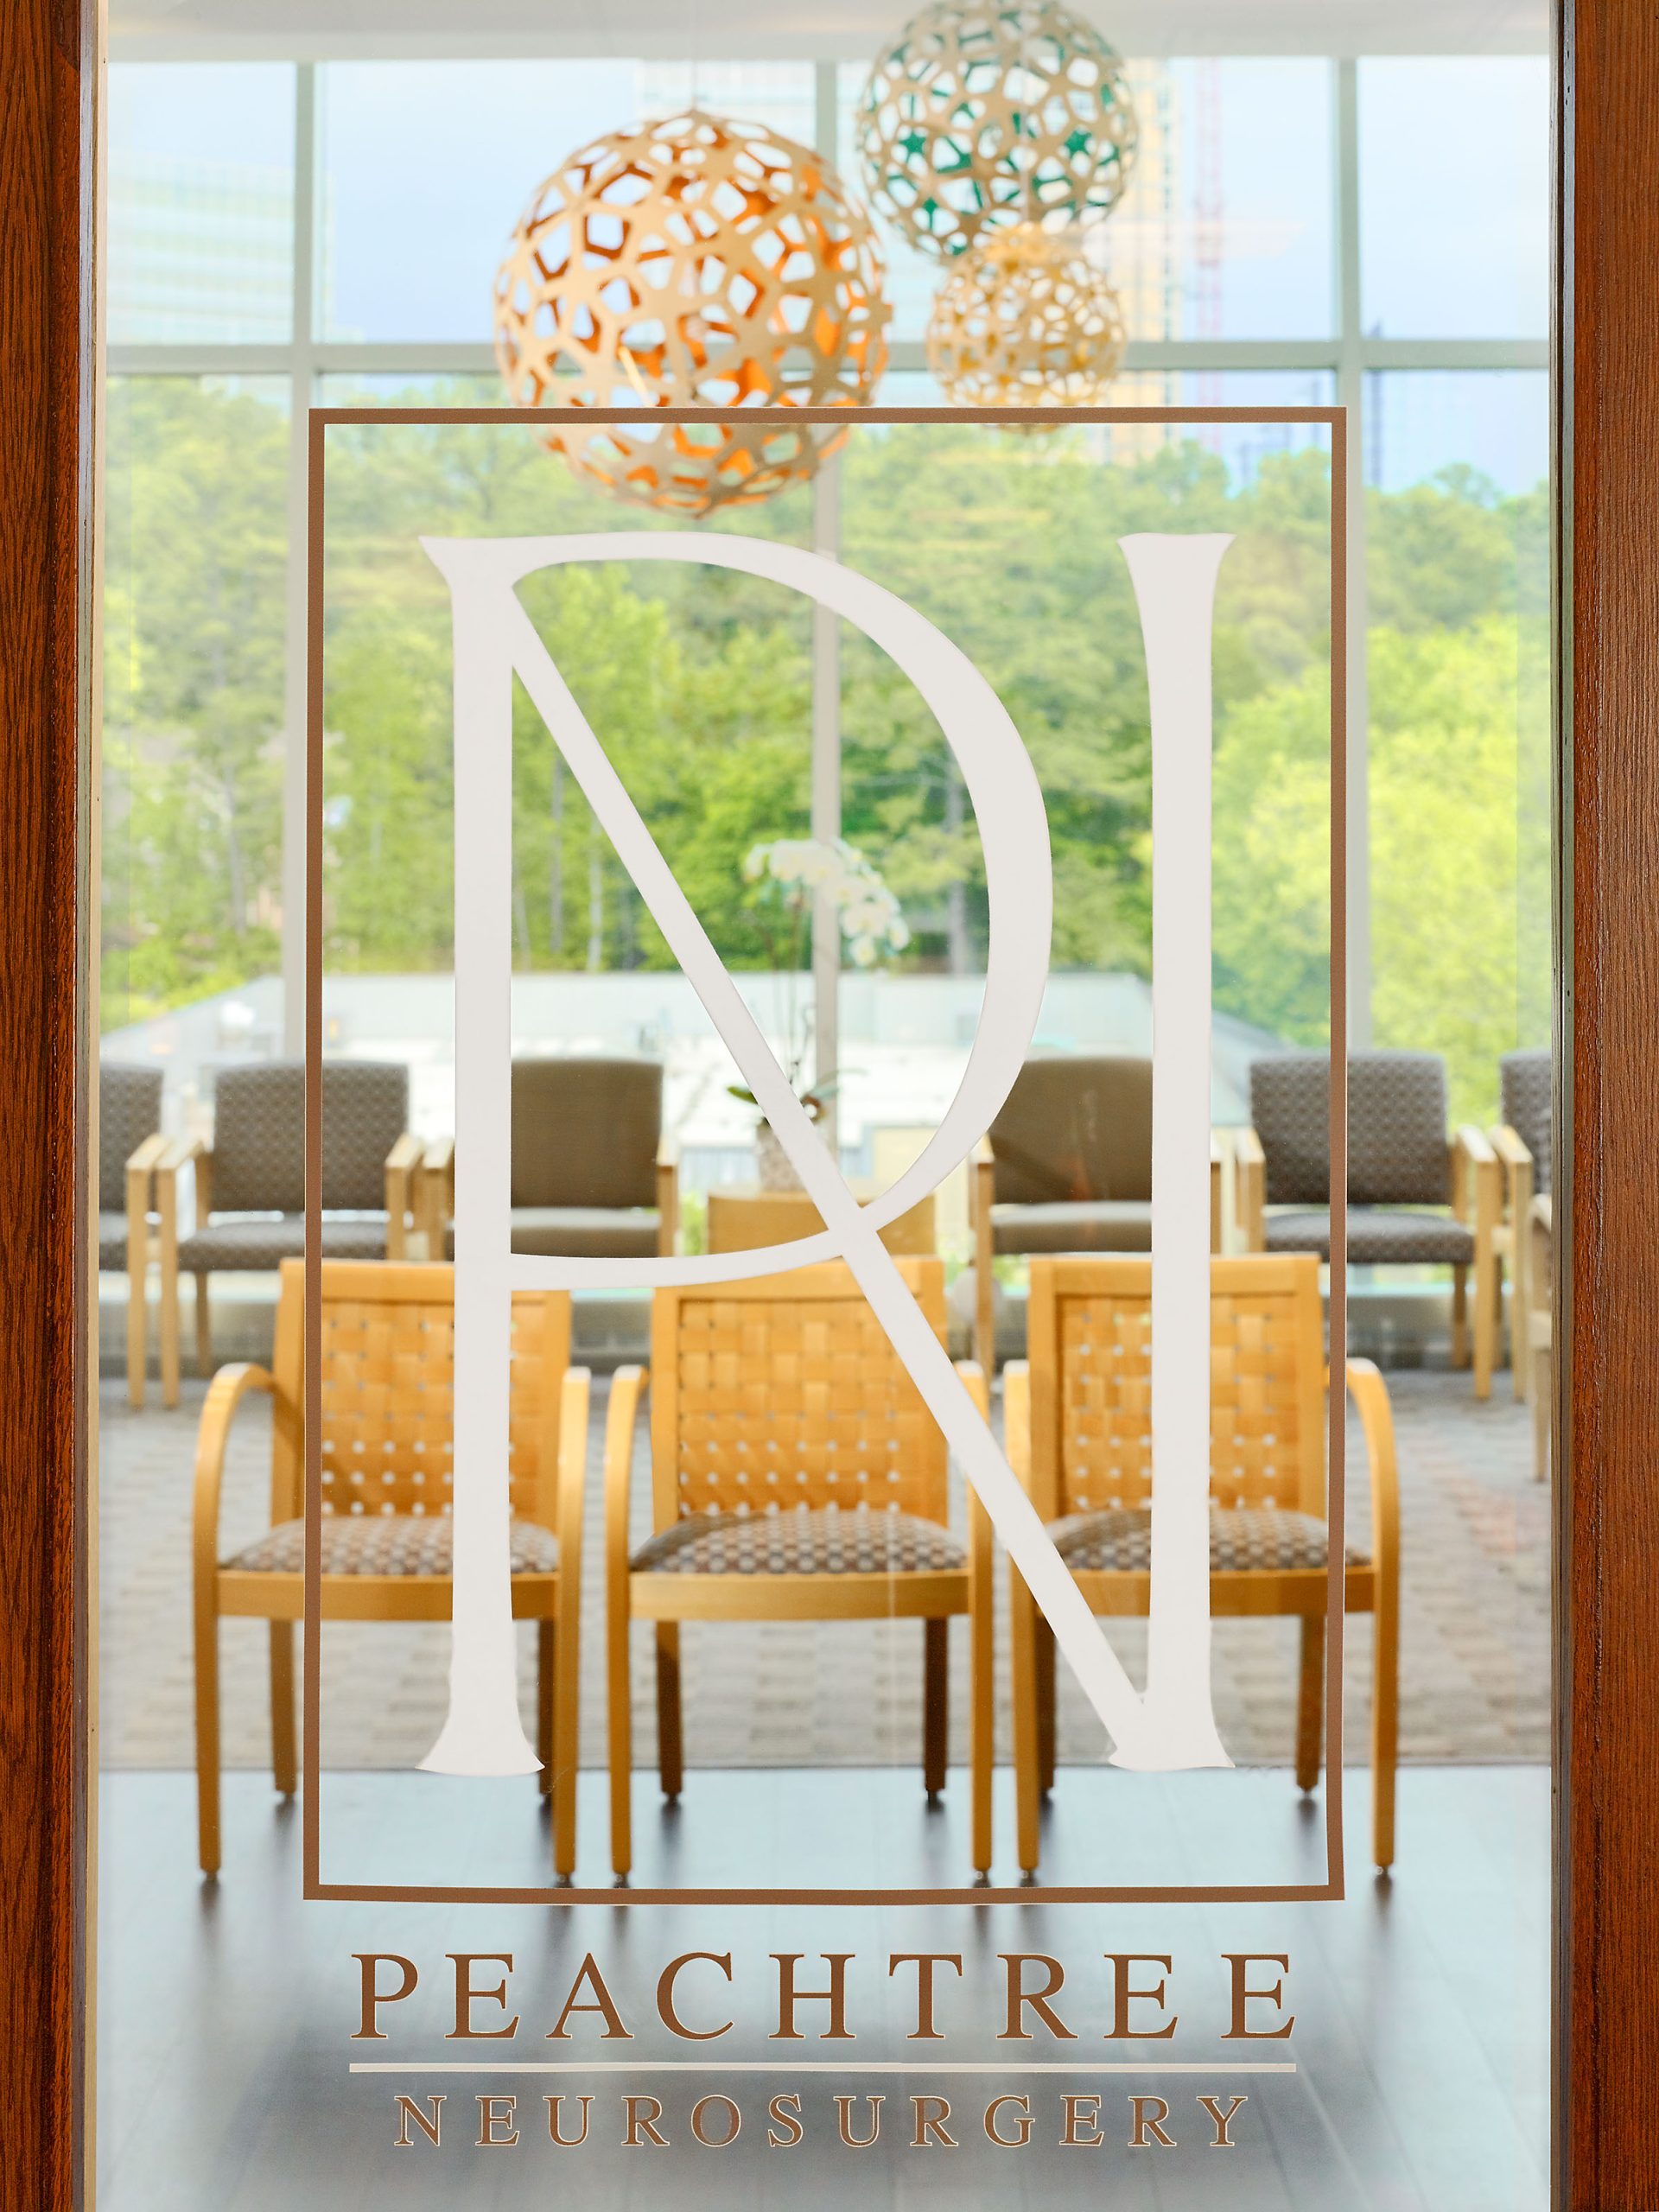 Peachtree Neurosurgery glass logo door with a view of a waiting room behind